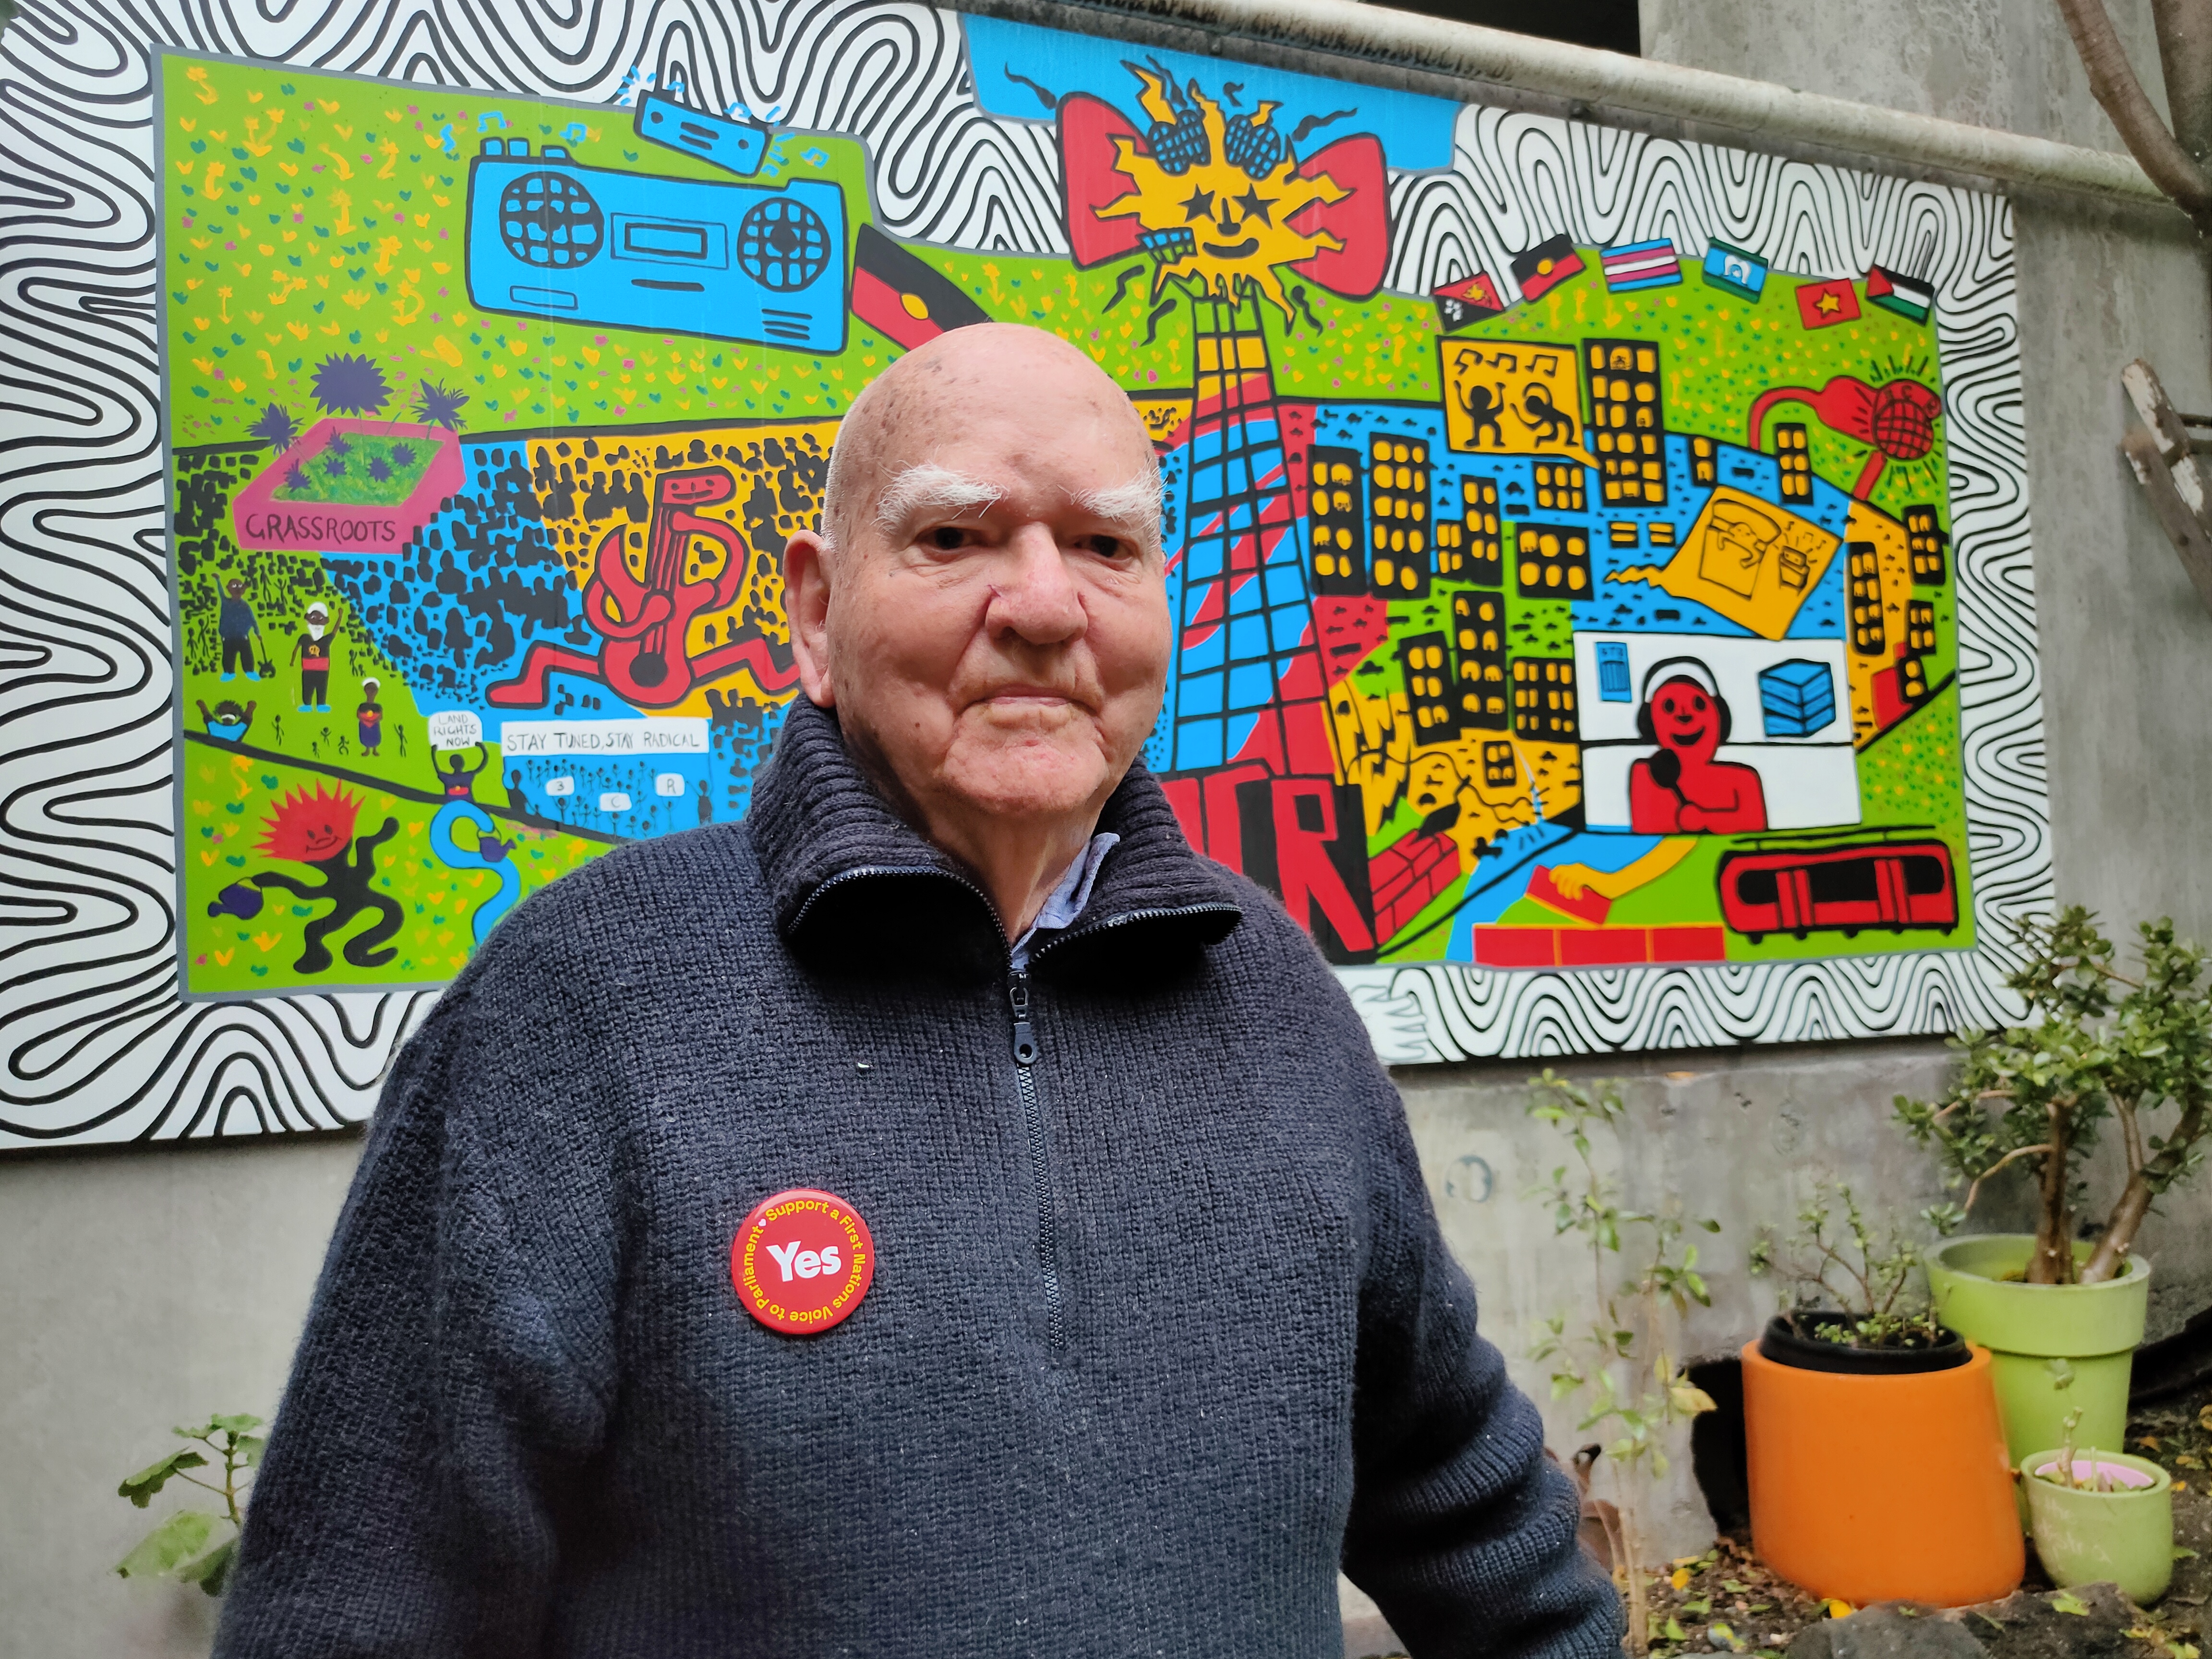 Percy stands in front of 3CR's new colourful mural in the courtyard. He wears a blue knitted jumper and sports a red YES badge